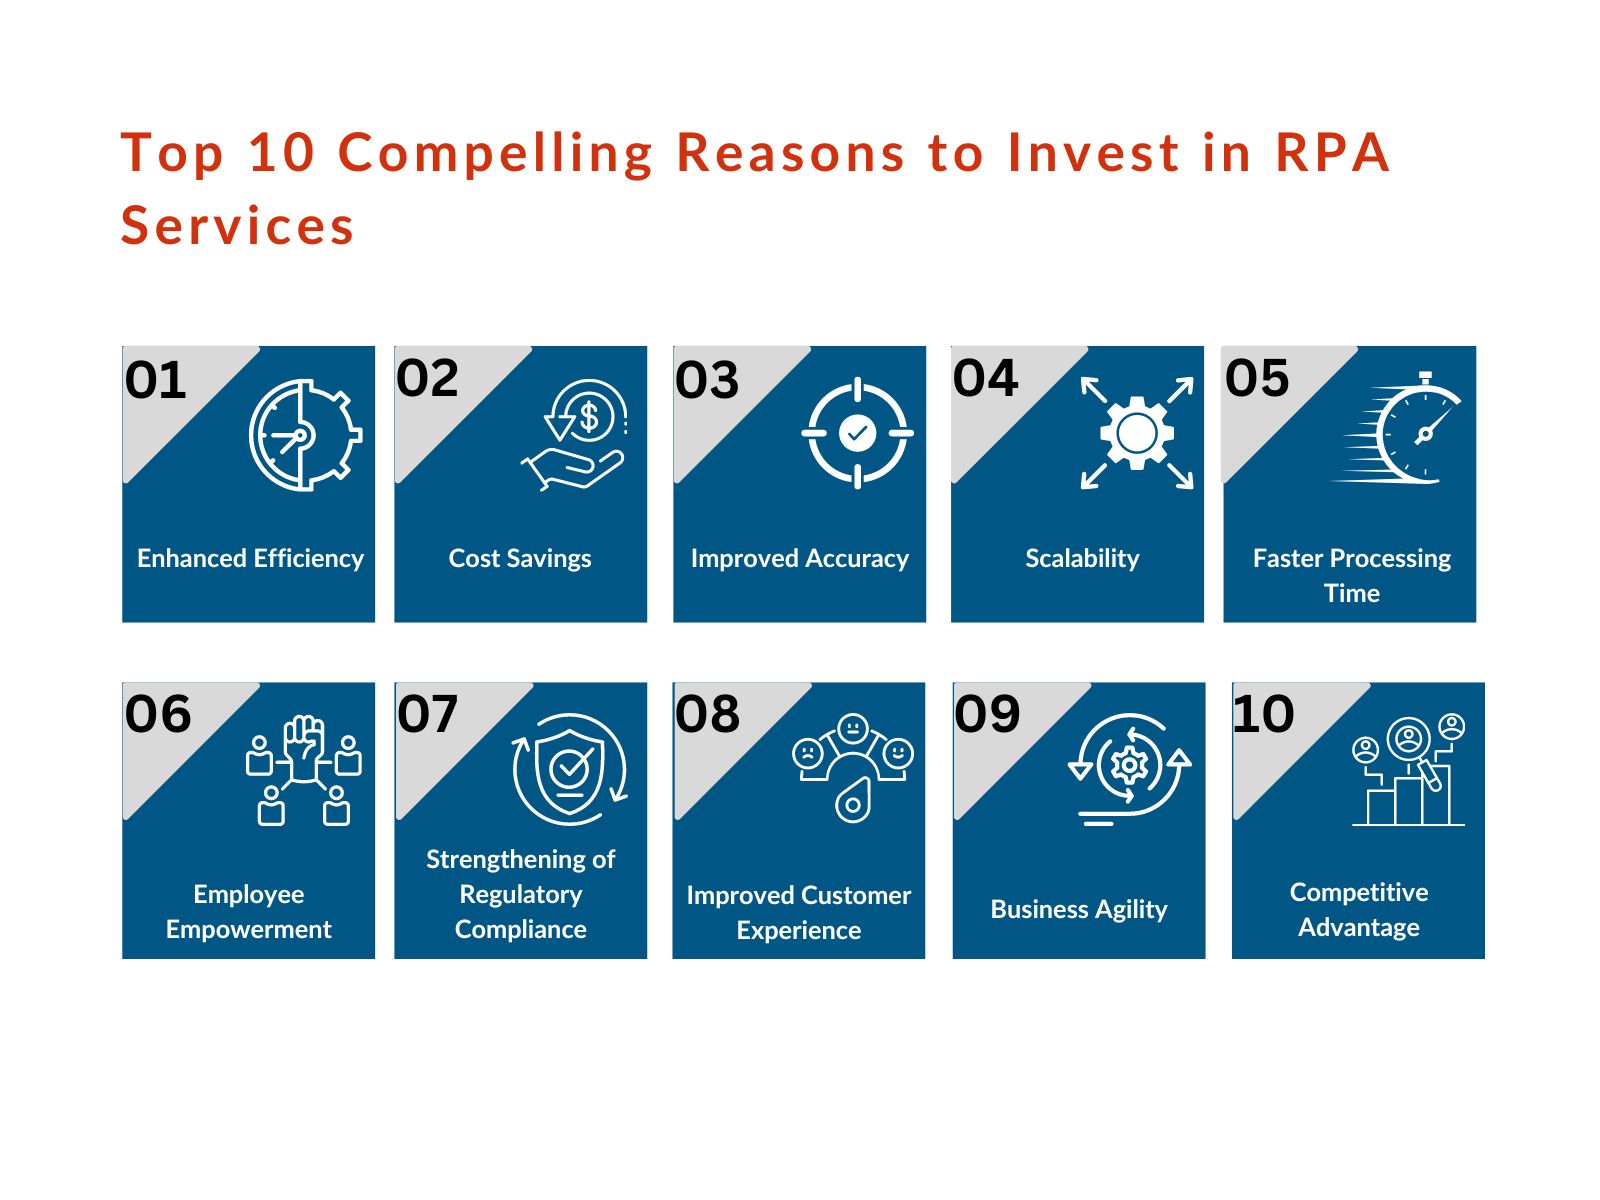 Top 10 Compelling Reasons to Invest in RPA Services